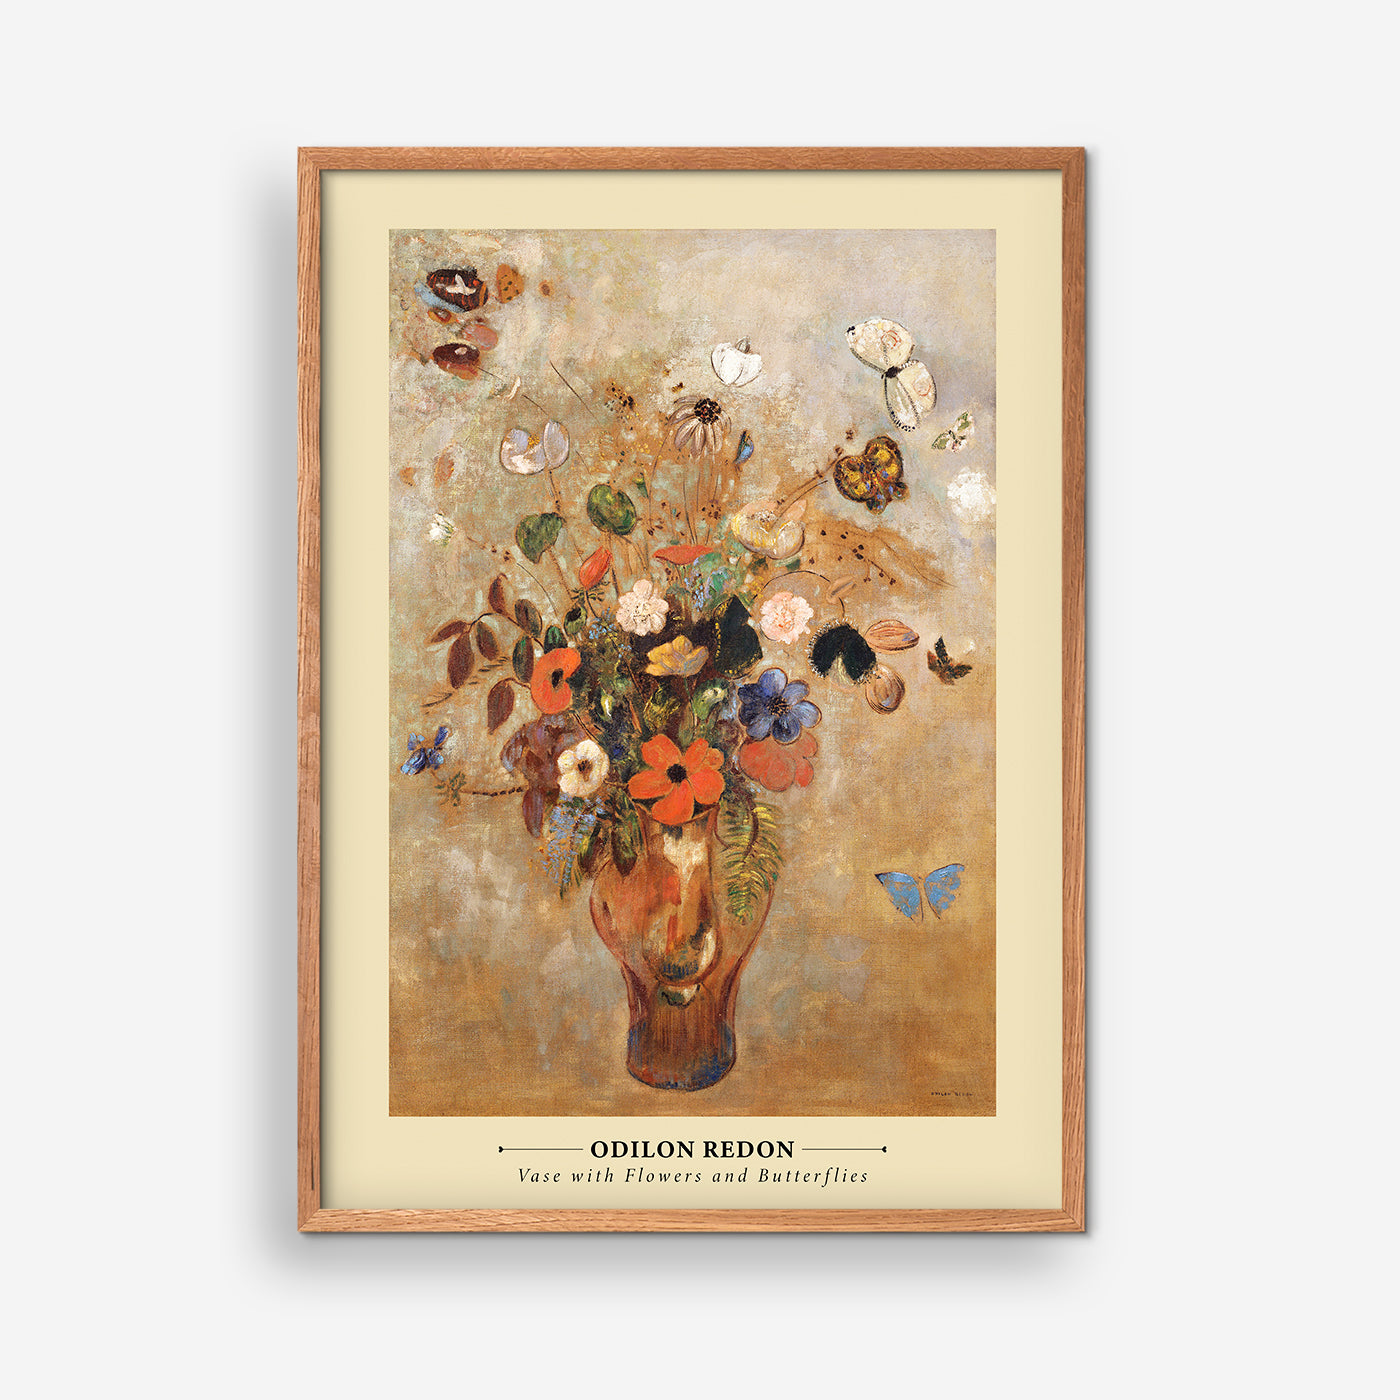 Vase with Flowers and Butterflies - Odilon Redon